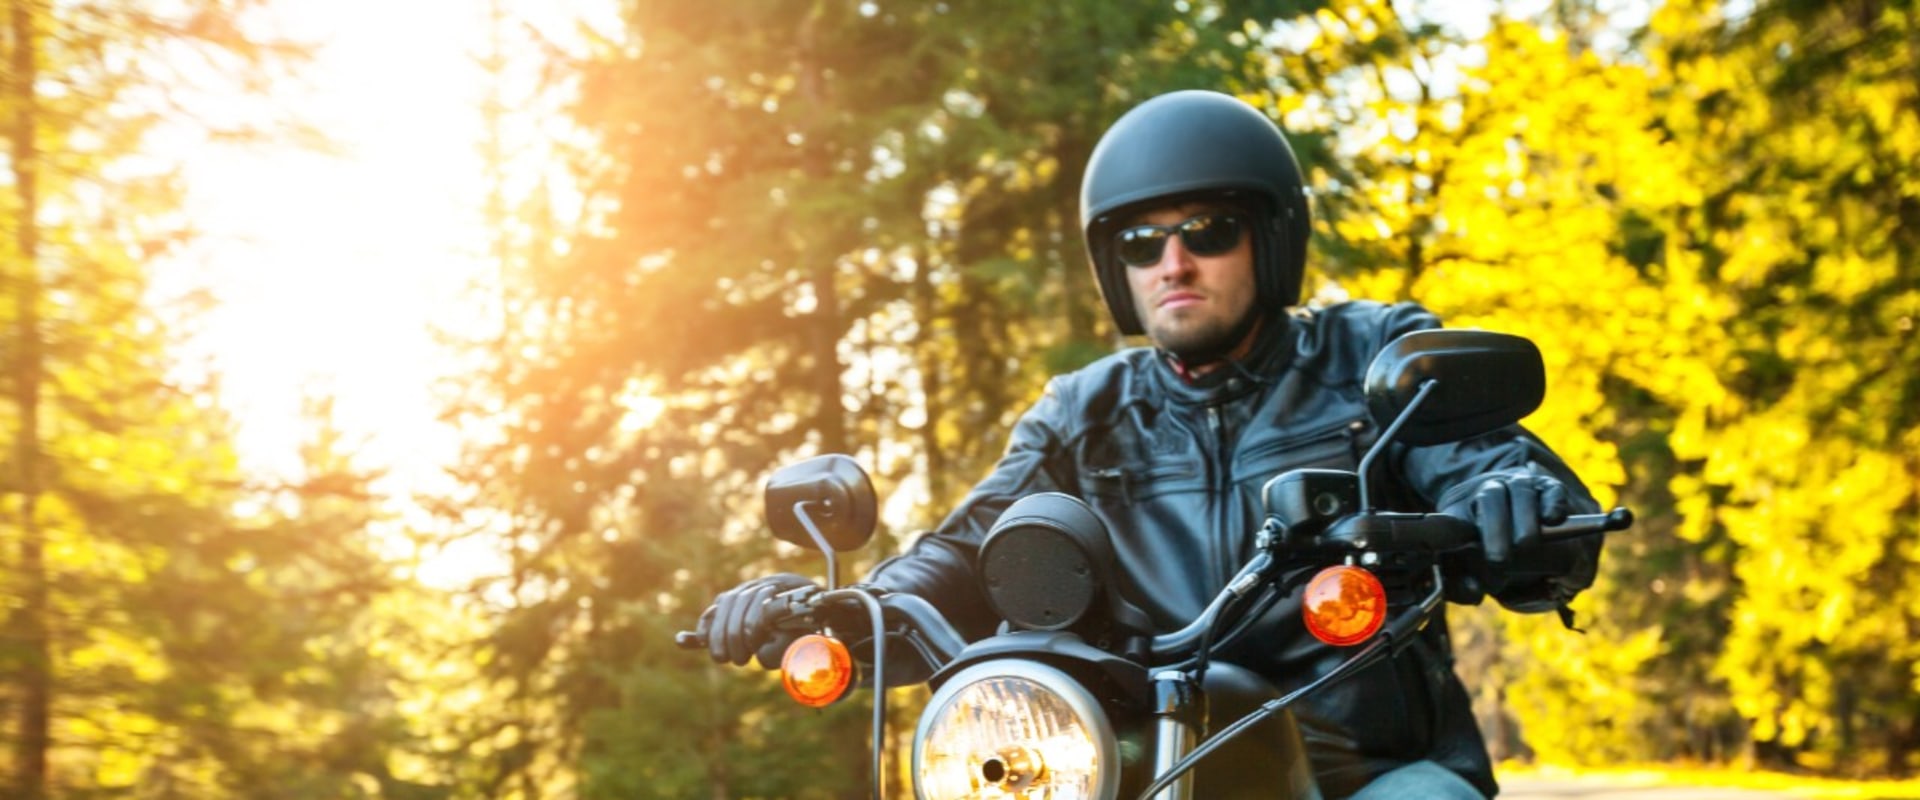 What is Important to Know About Motorcycle Insurance?